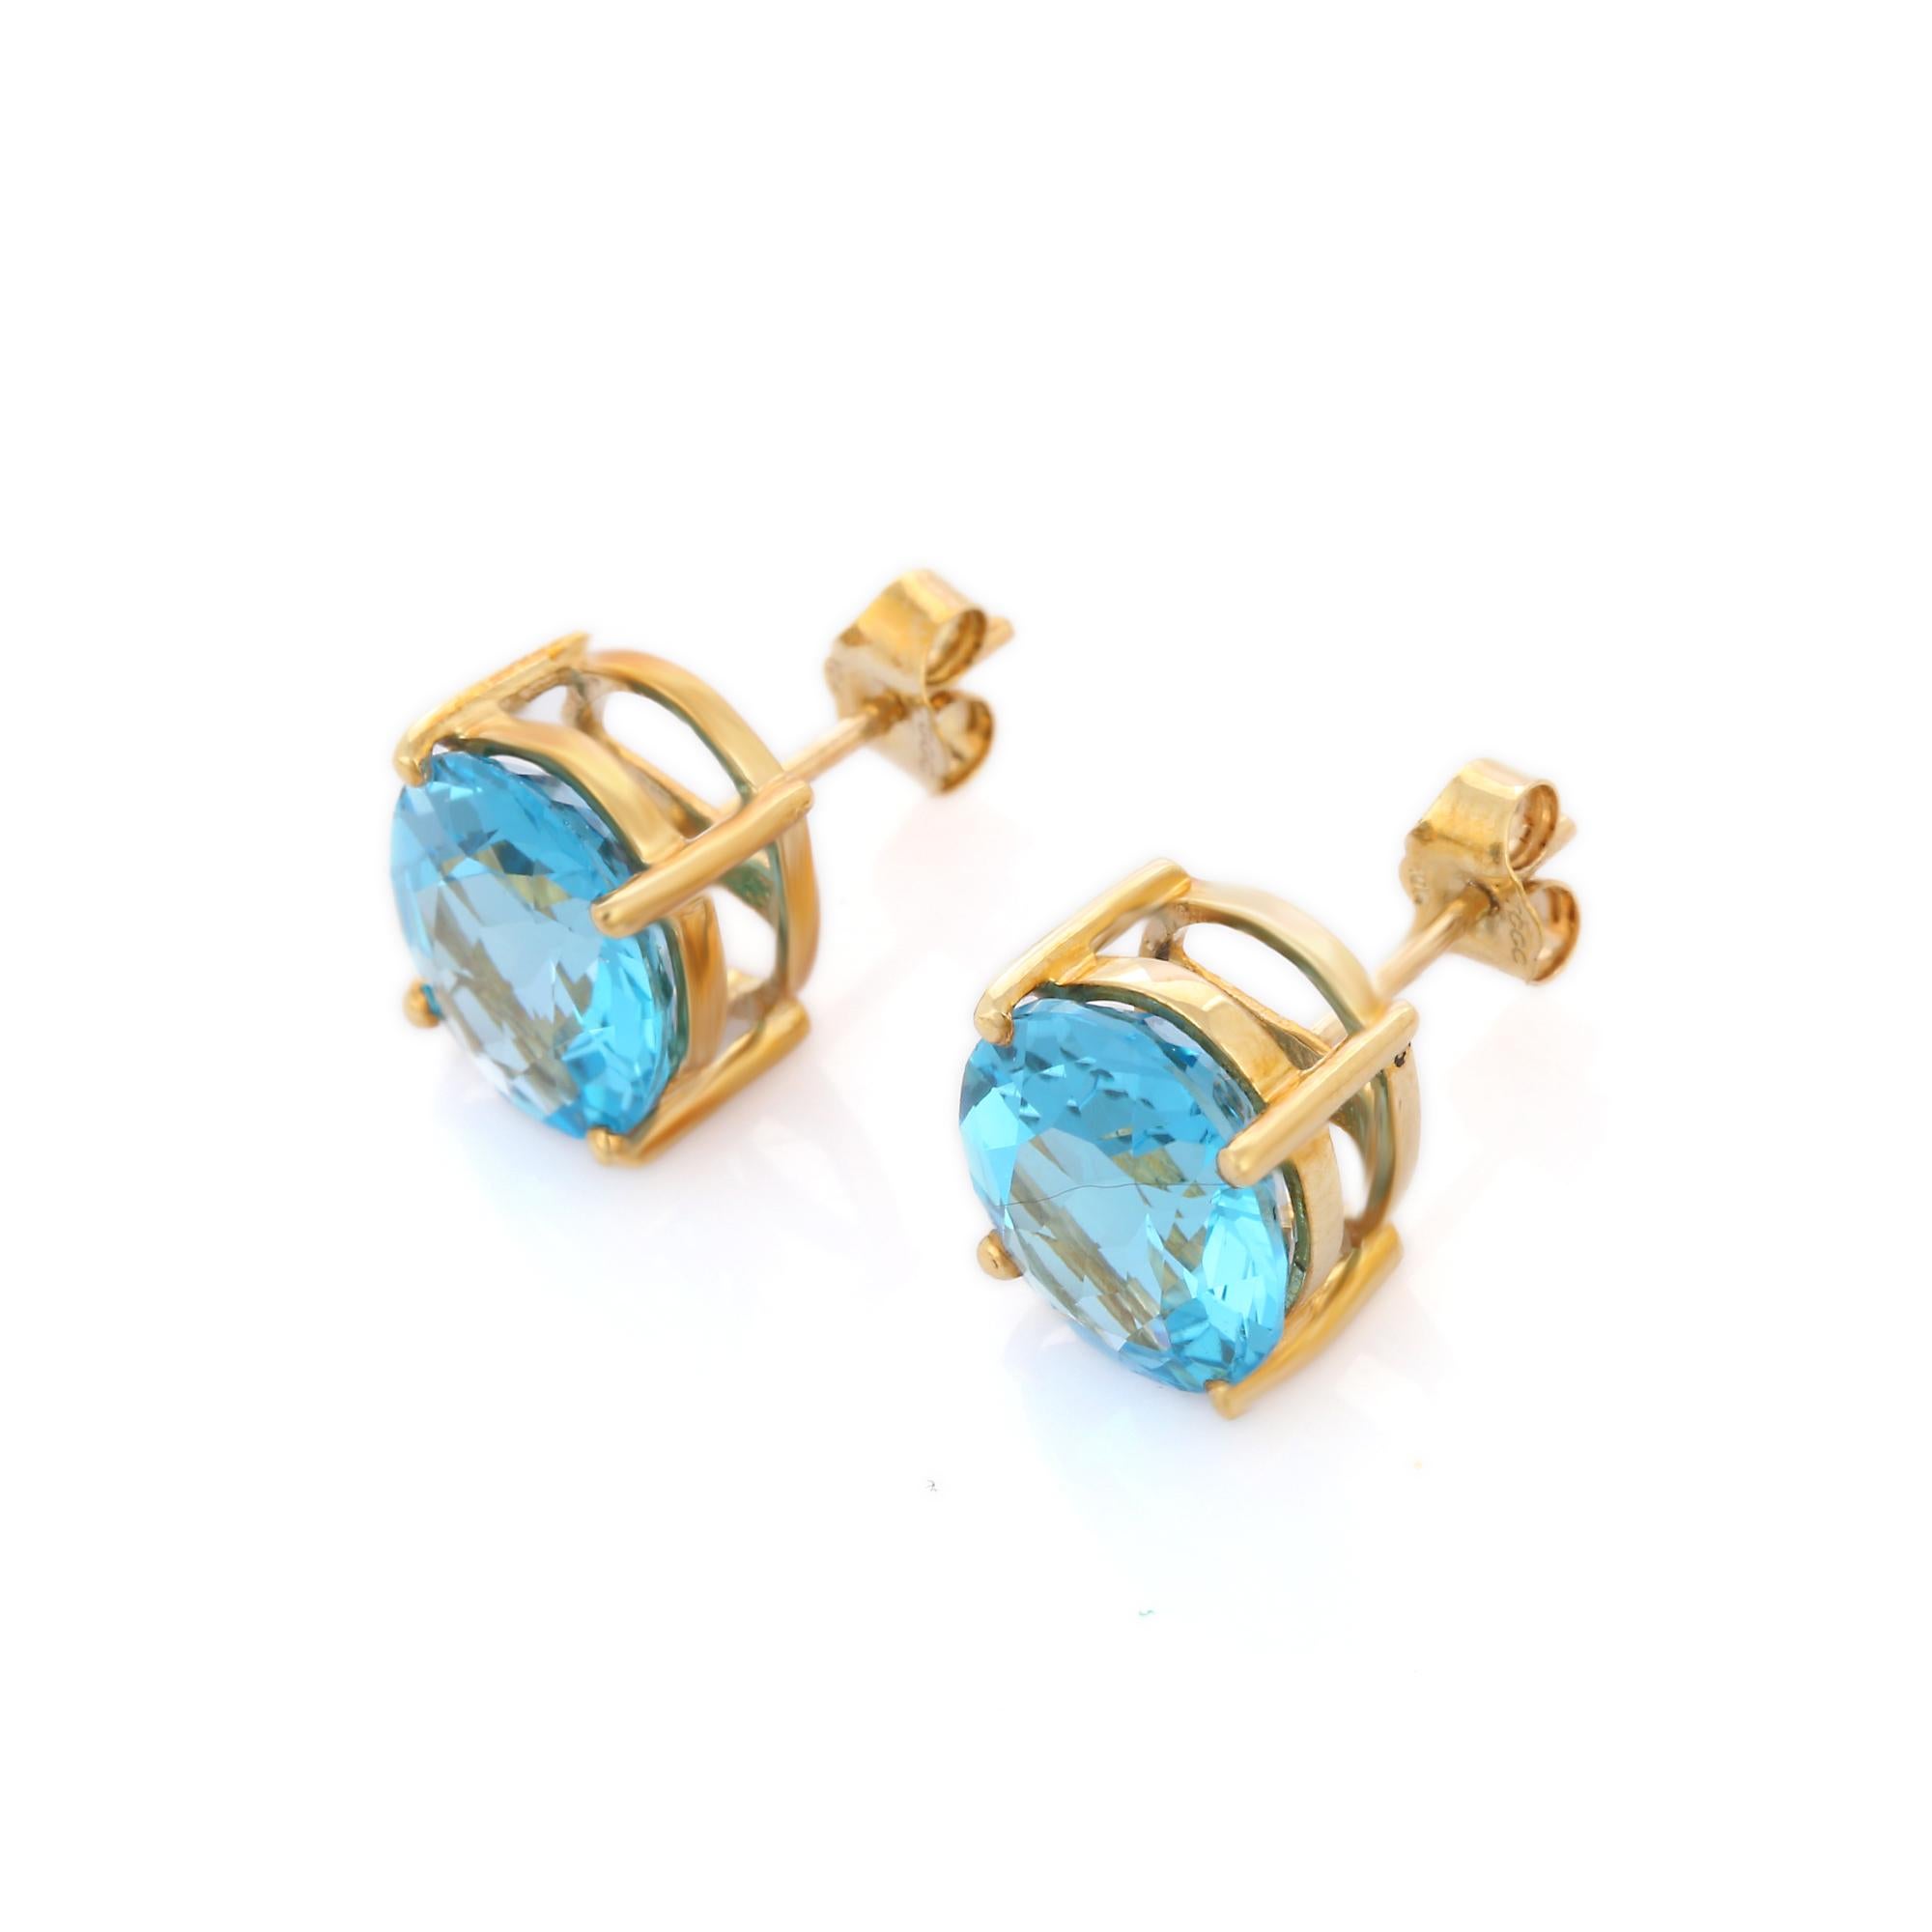 Studs create a subtle beauty while showcasing the colors of the natural precious gemstones.

Oval cut blue topaz studs in 10K gold. Embrace your look with these stunning pair of earrings suitable for any occasion to complete your outfit.

PRODUCT